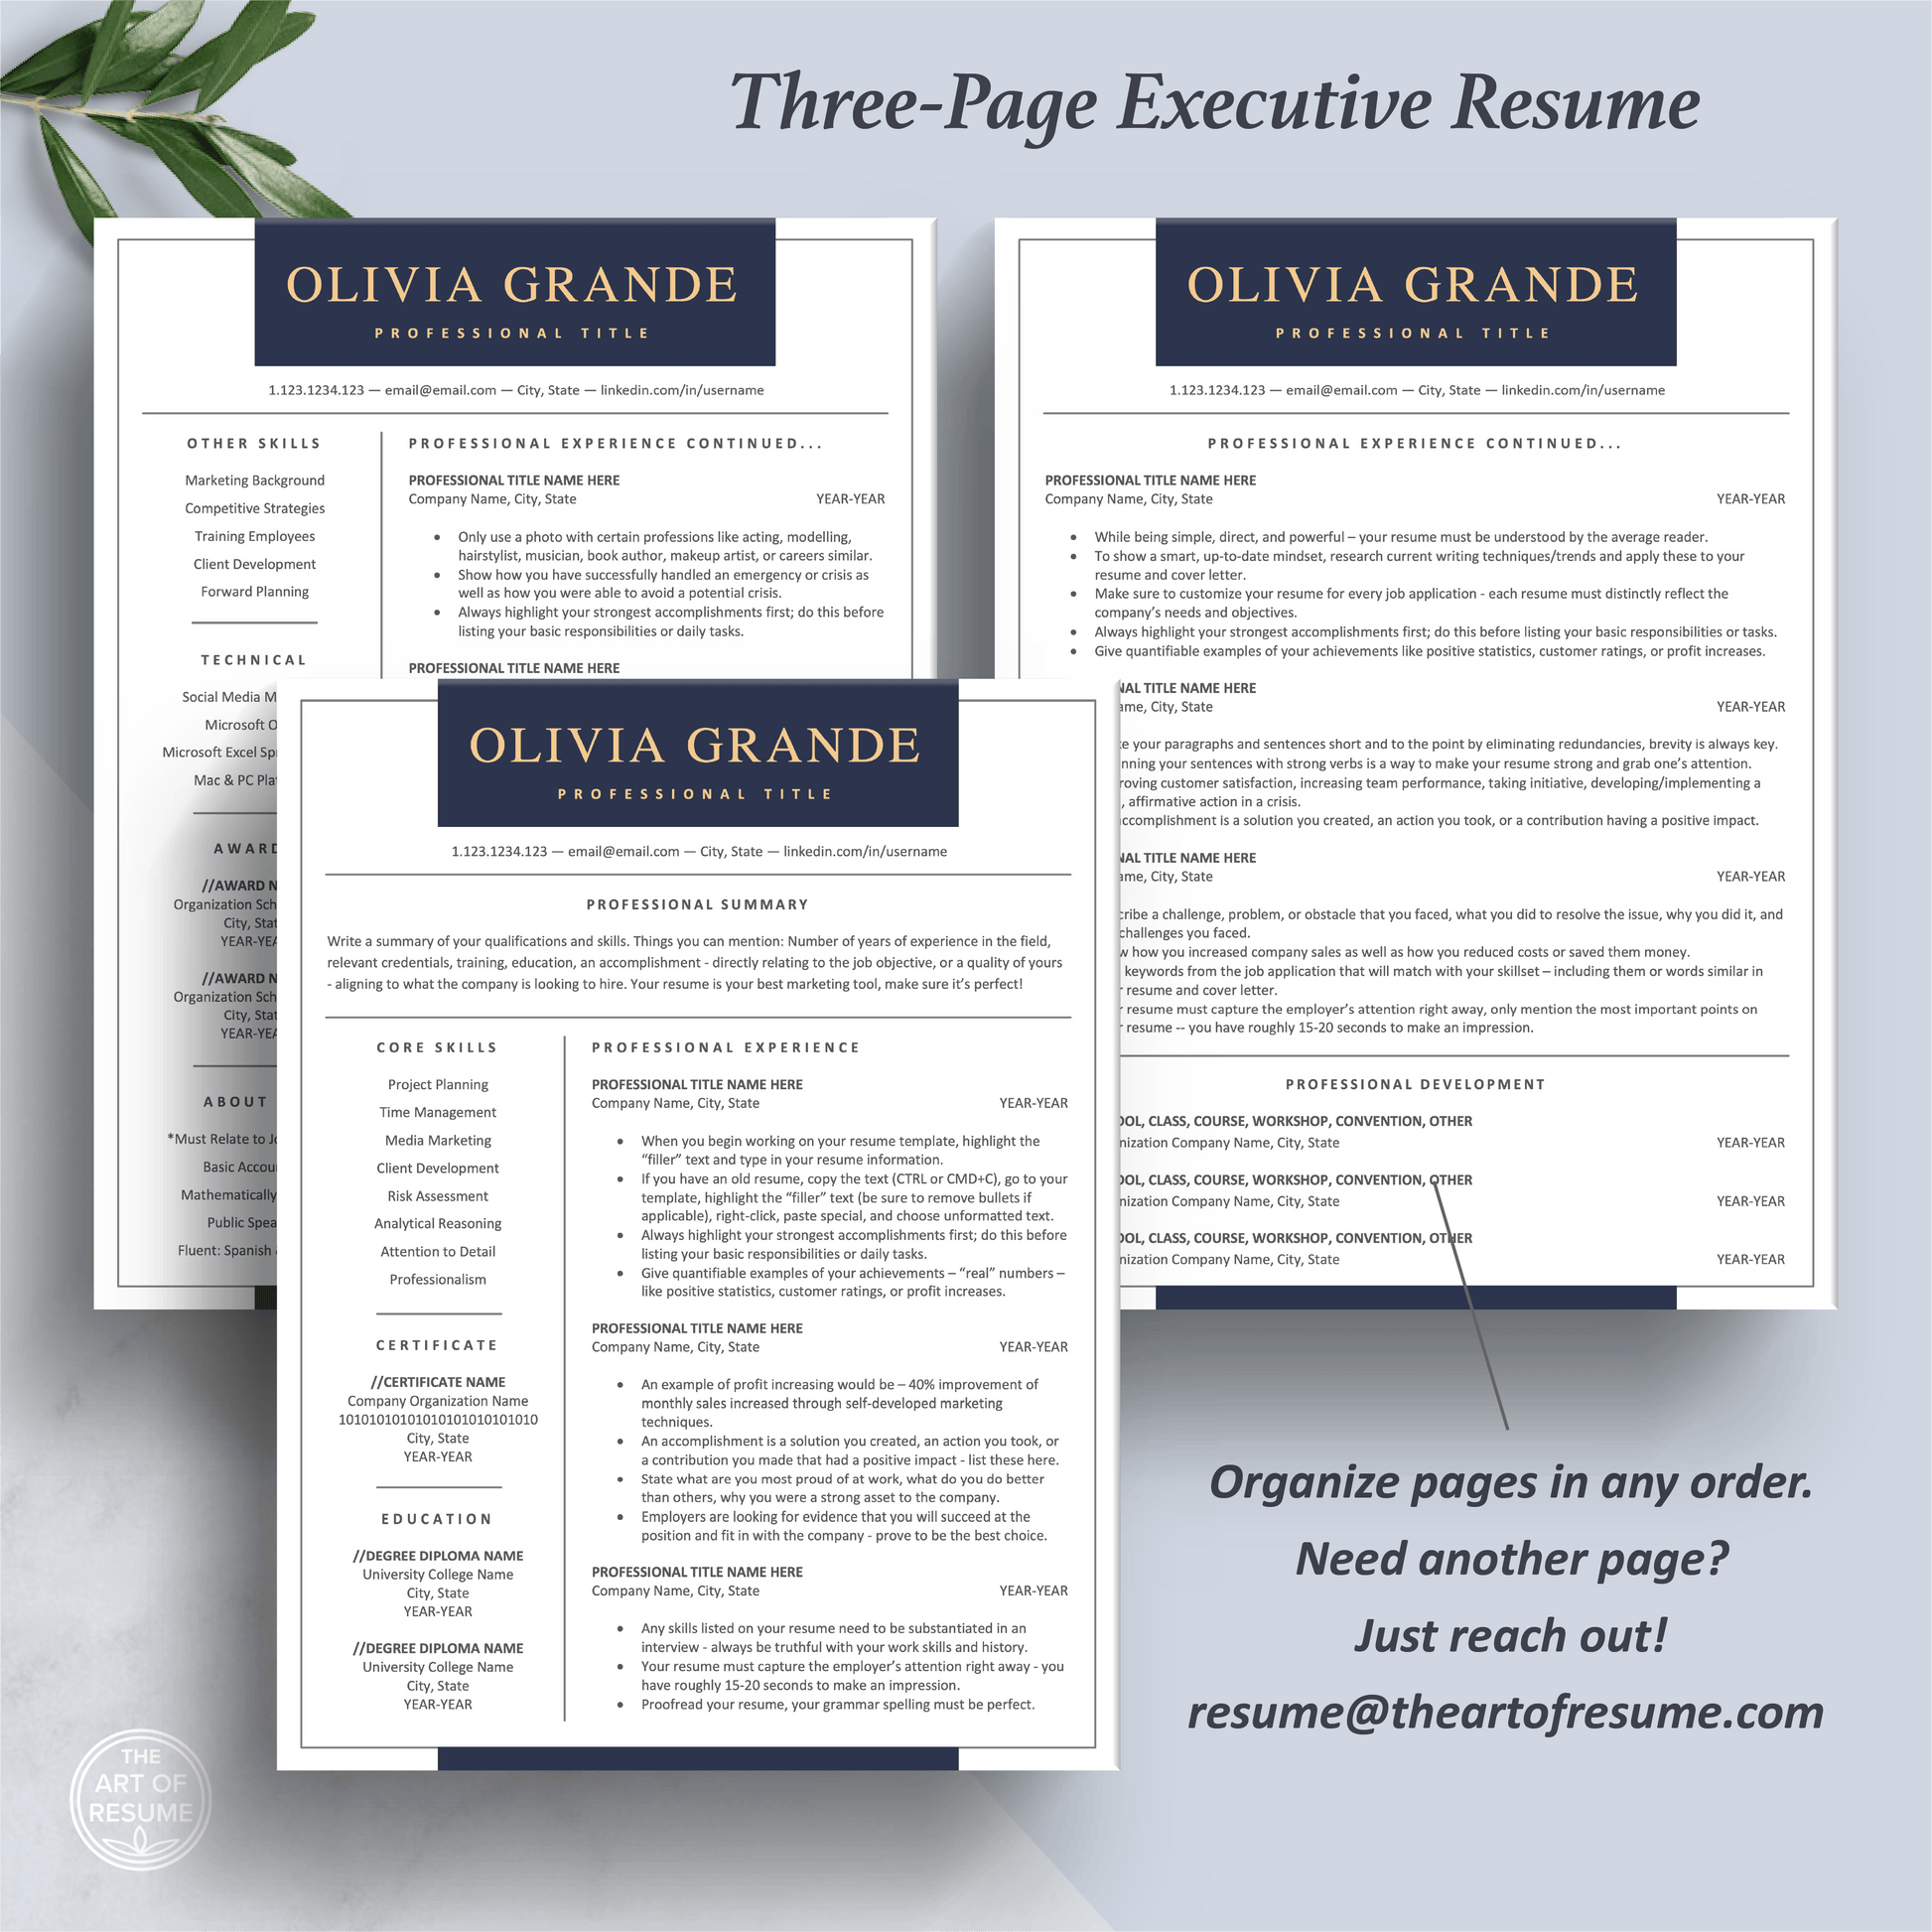 The Art of Resume Templates | Three-Page Professional Navy Executive C-Suite Level  Resume CV Template Format | Curriculum Vitae